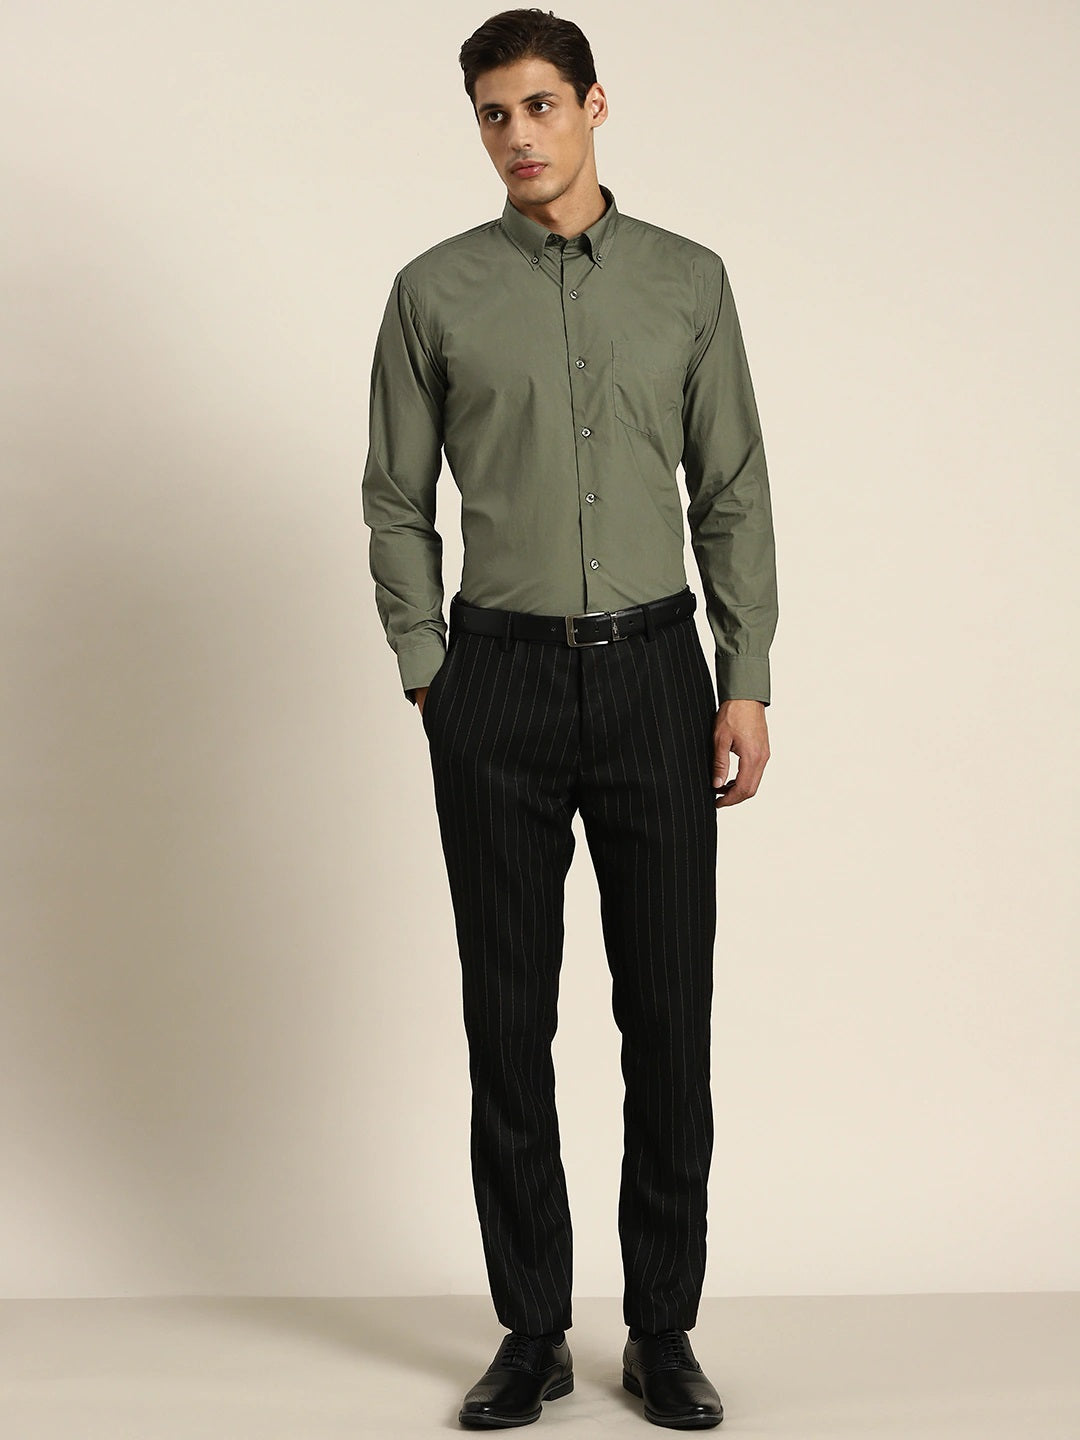 5TH ANFOLD Men Solid Formal Green Shirt - Buy 5TH ANFOLD Men Solid Formal Green  Shirt Online at Best Prices in India | Flipkart.com